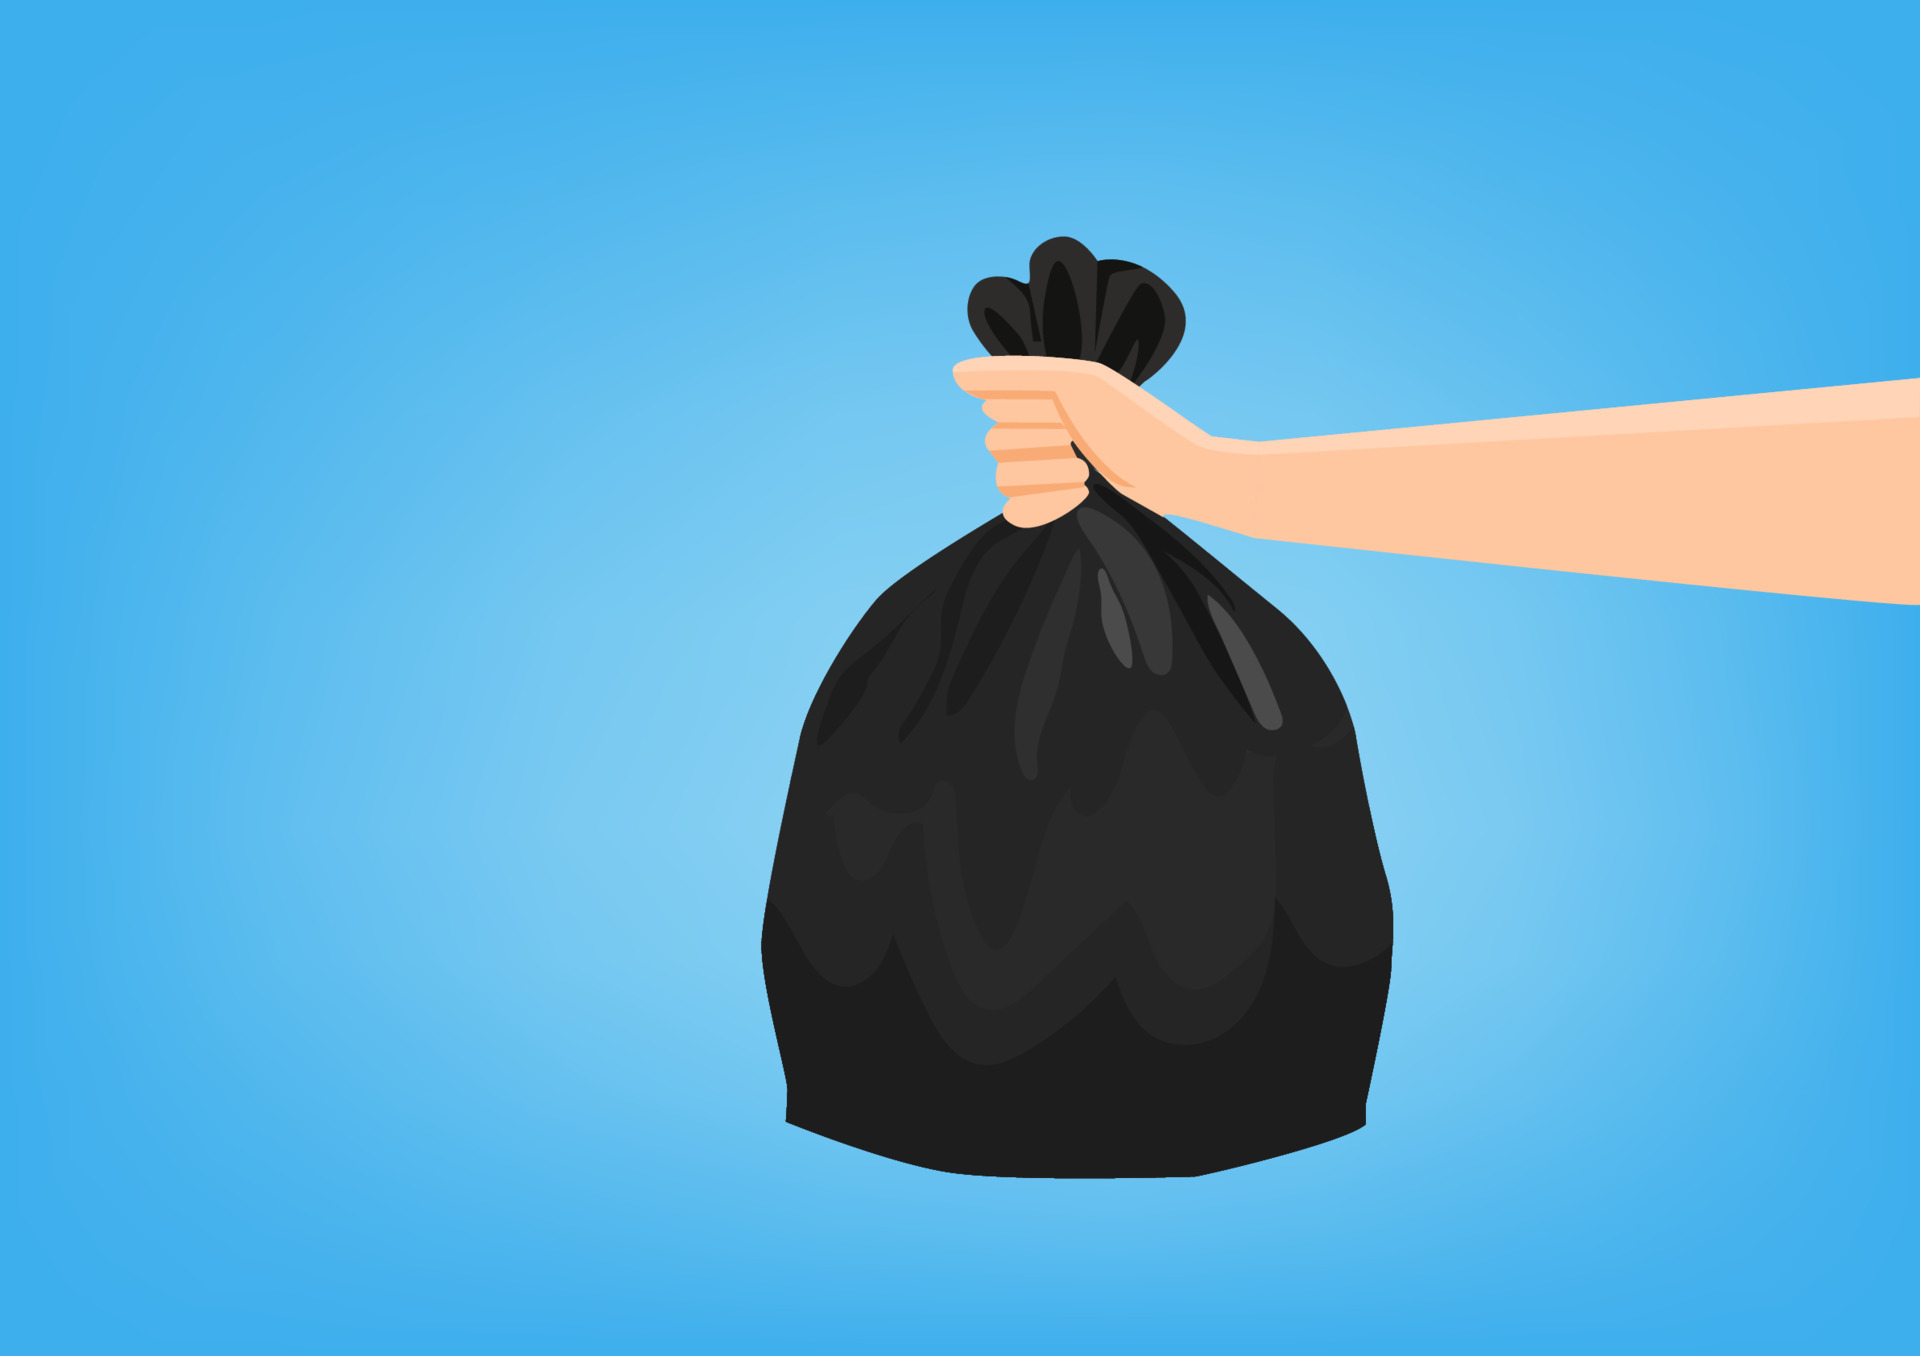 https://static.vecteezy.com/system/resources/previews/005/607/194/original/hand-holding-a-black-plastic-bag-to-dispose-of-rubbish-blue-background-flat-style-cartoon-illustration-illustration-vector.jpg